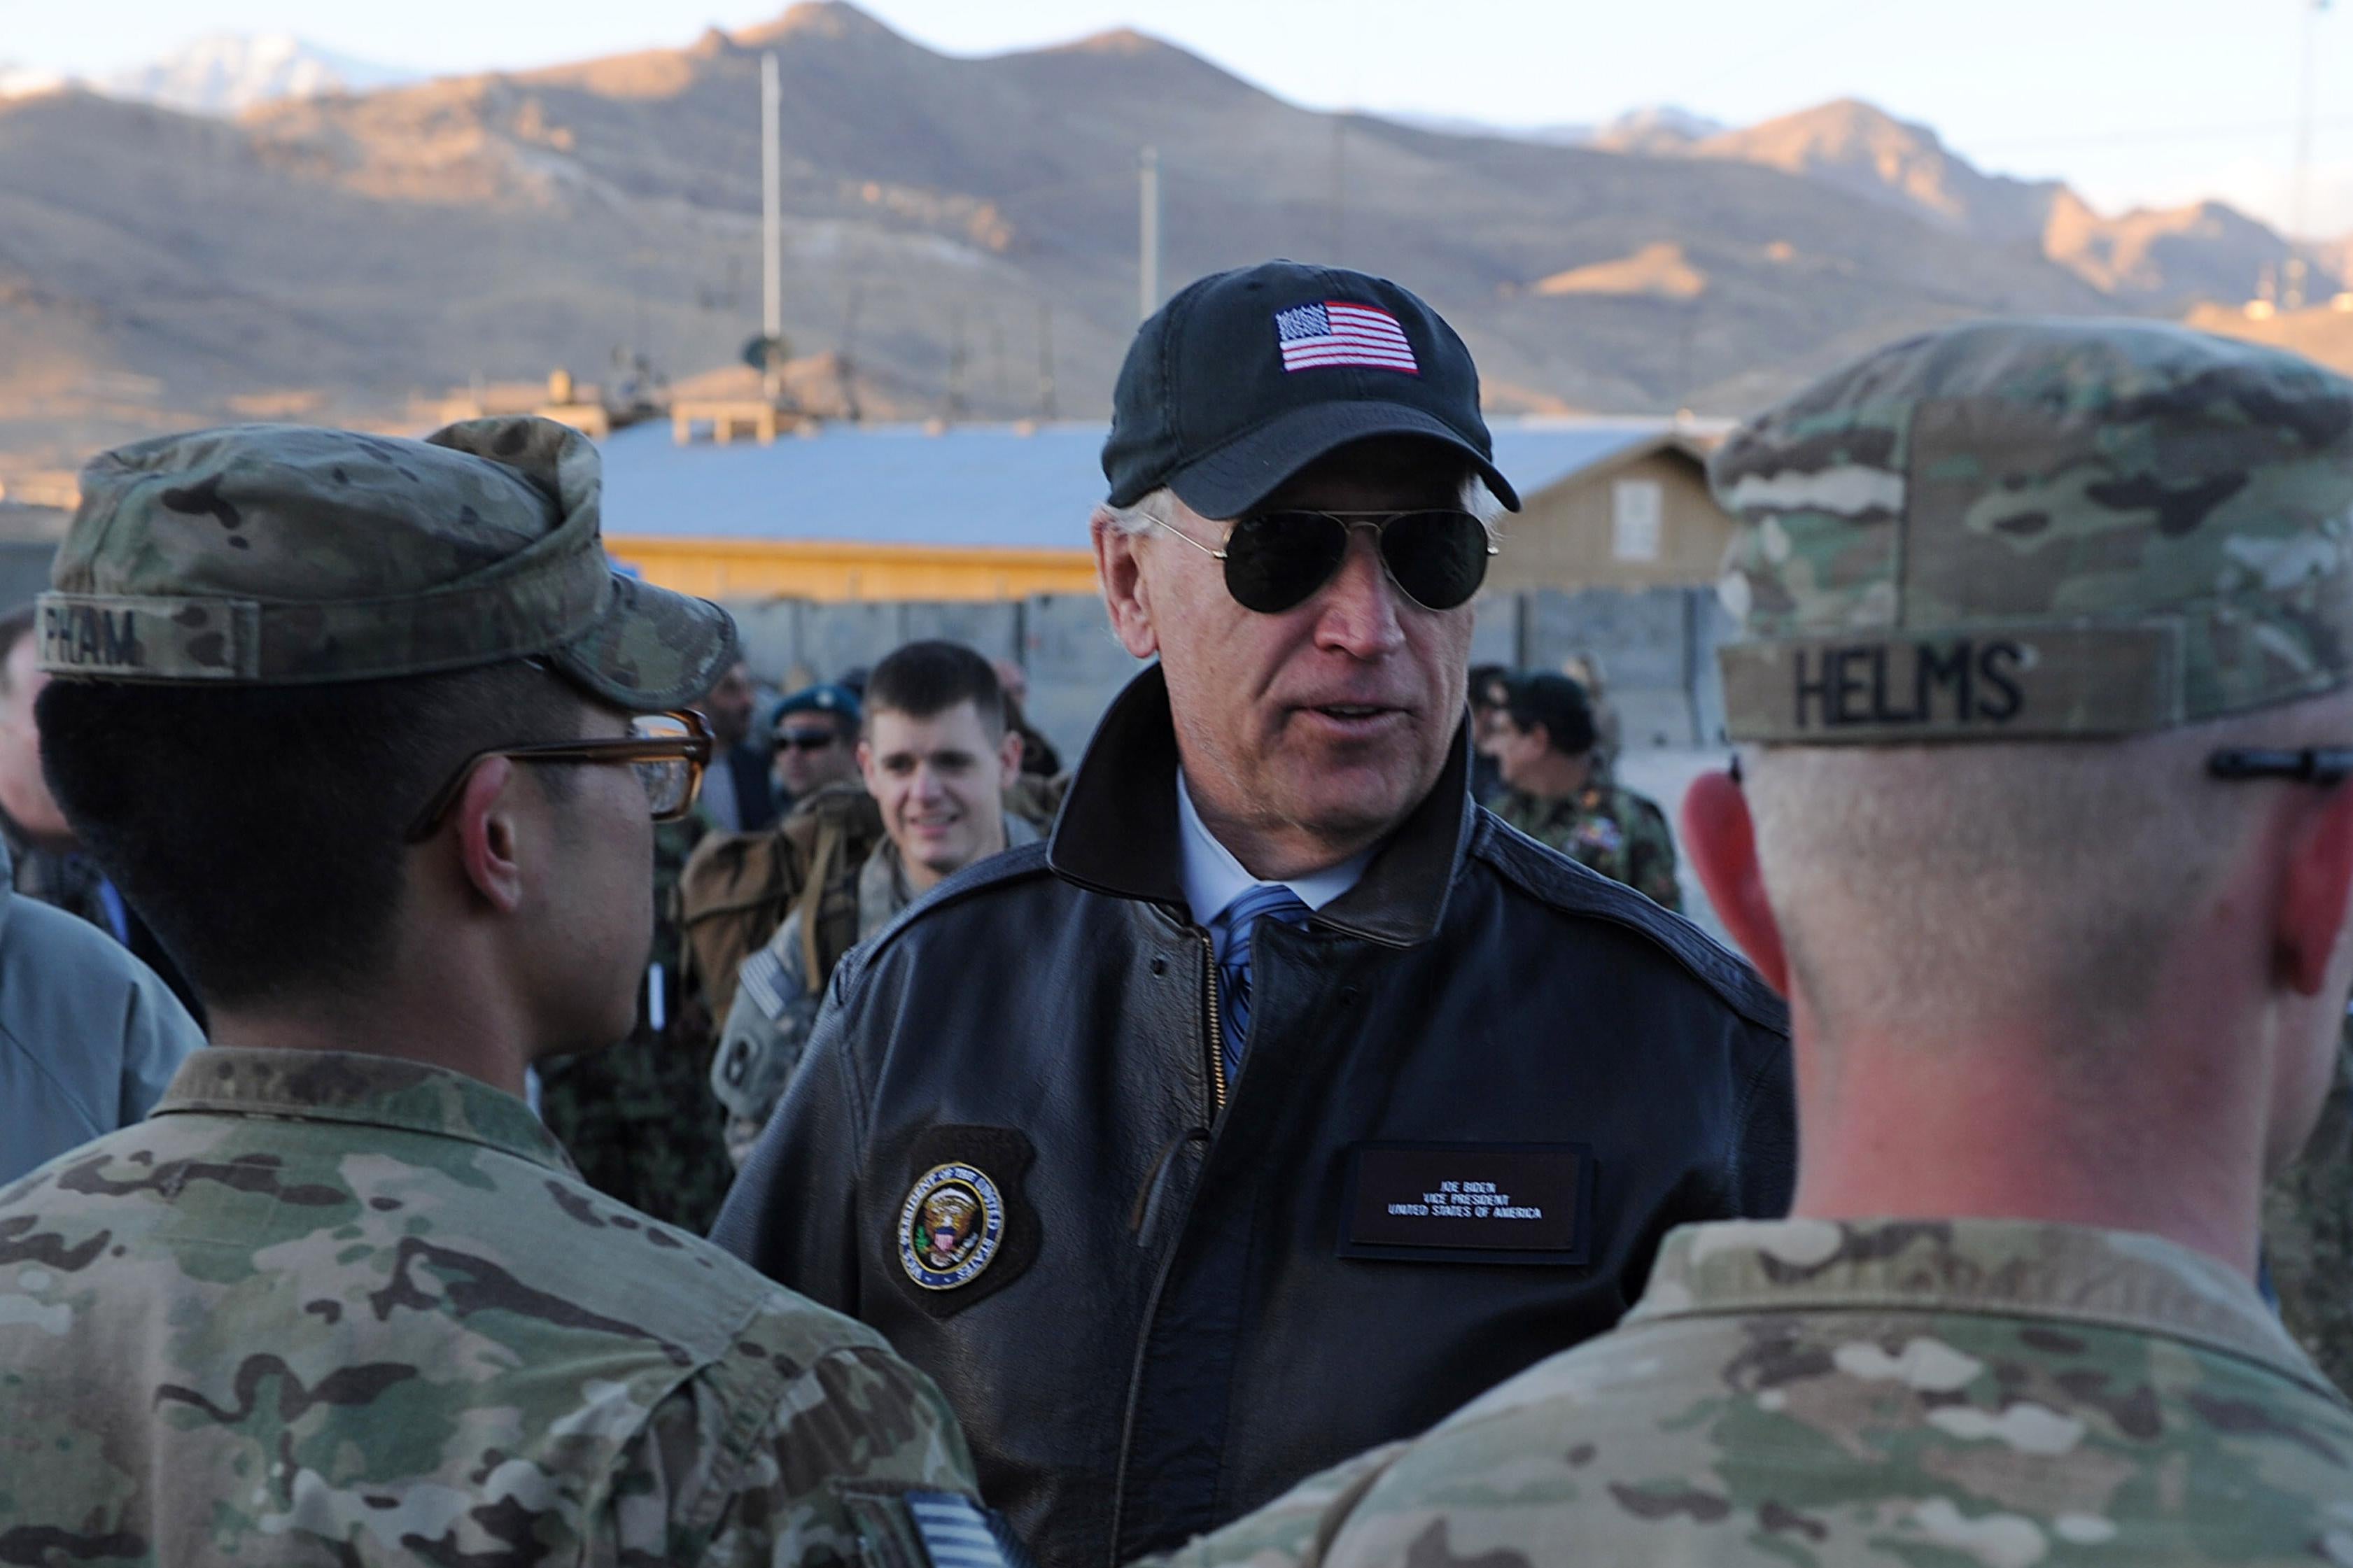 Biden in an American flag hat speaks to two soldiers with mountains and a helicopter in the background. 